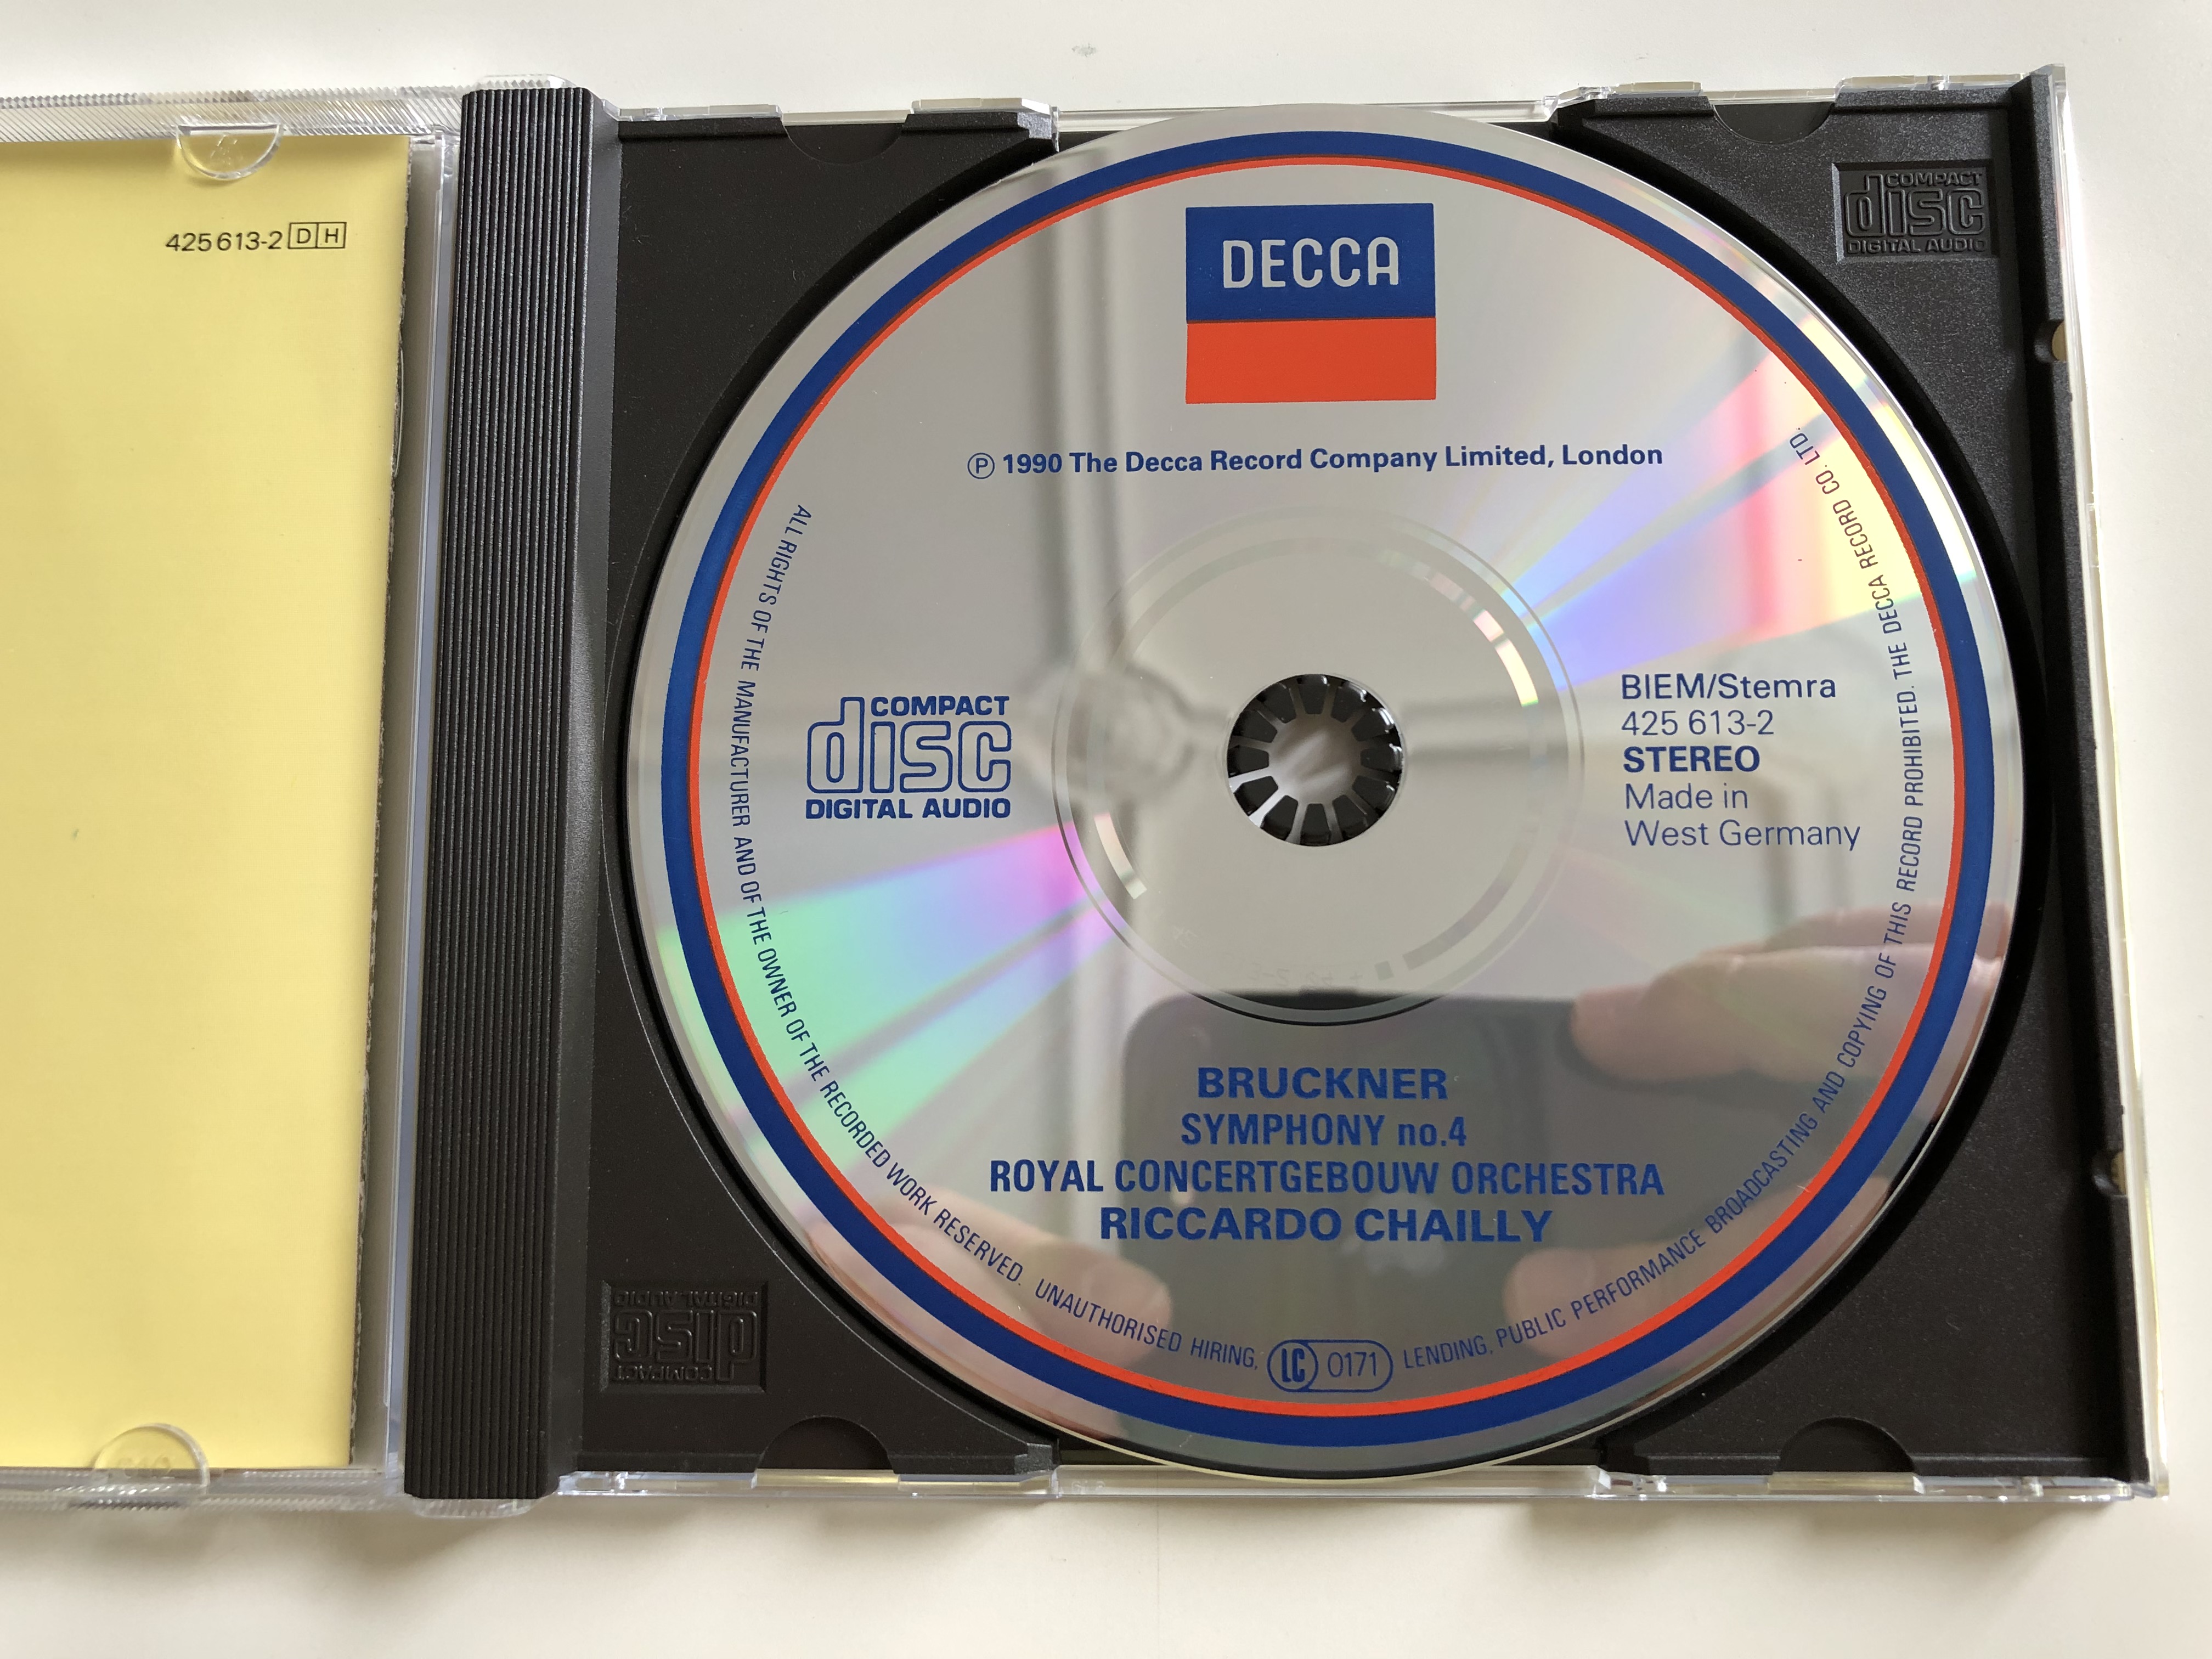 bruckner-symphony-no.-4-royal-concertgebouw-orchestra-conducted-by-riccardo-chailly-decca-audio-cd-1990-425-613-2-5-.jpg